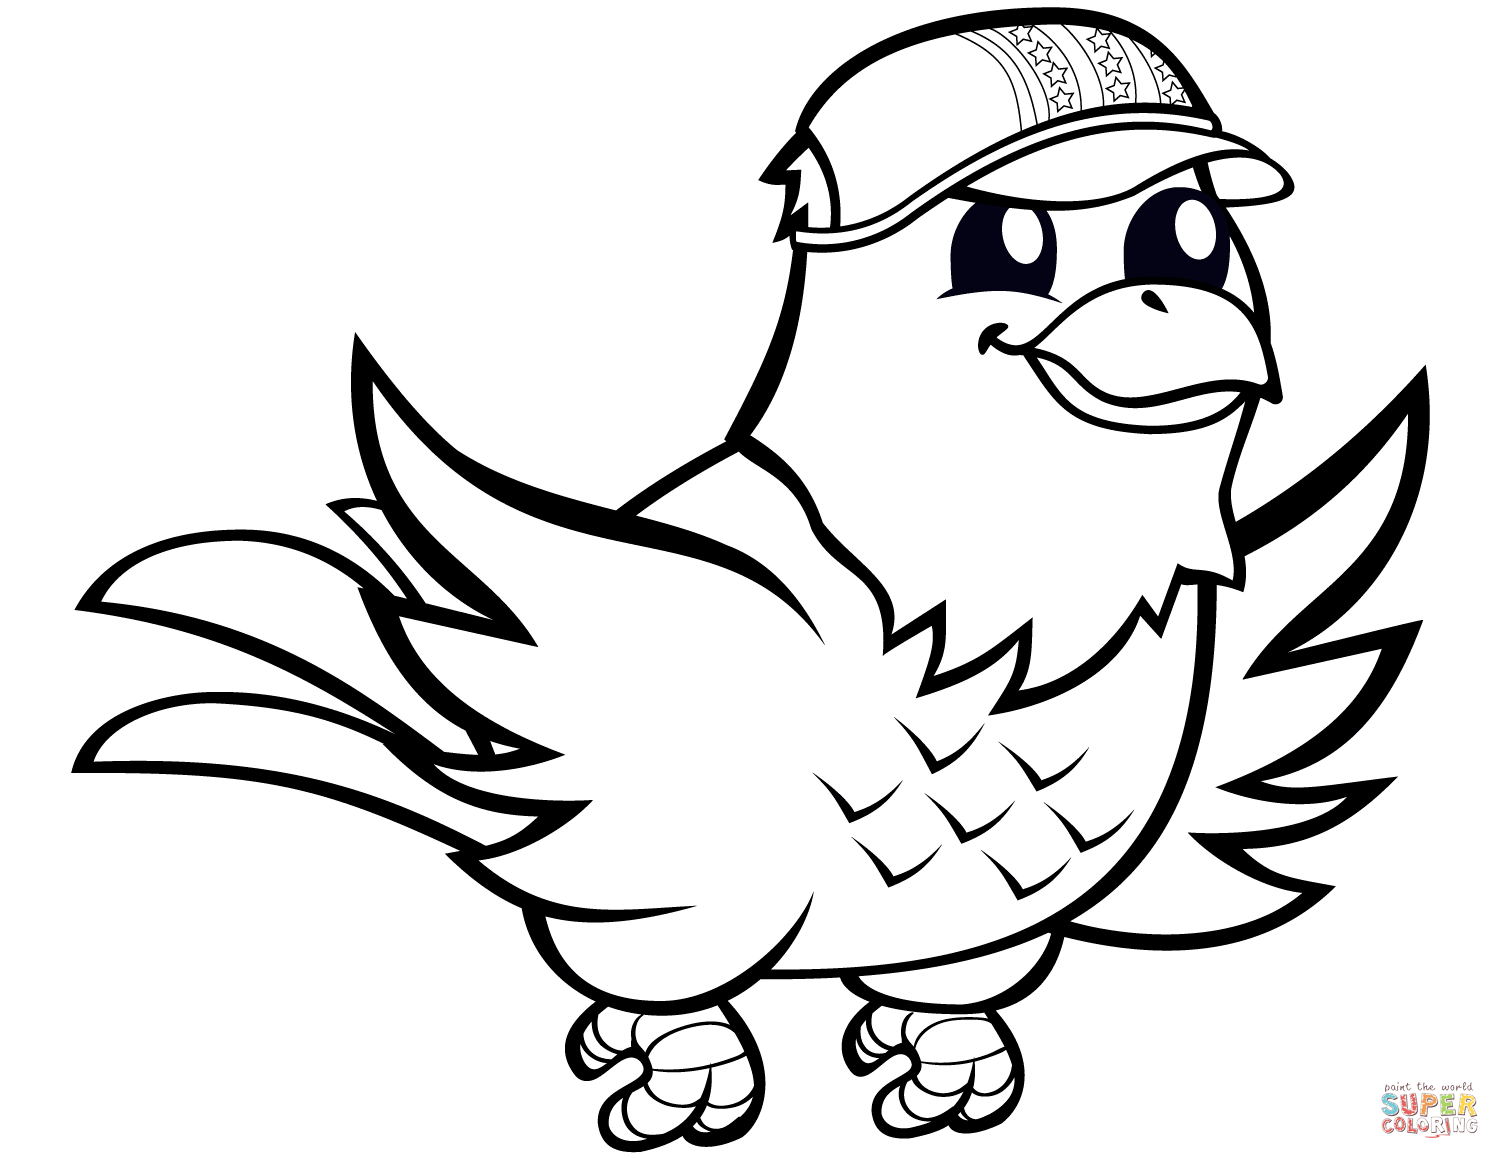 Funny Eagle with Baseball Cap coloring page | Free Printable Coloring Pages